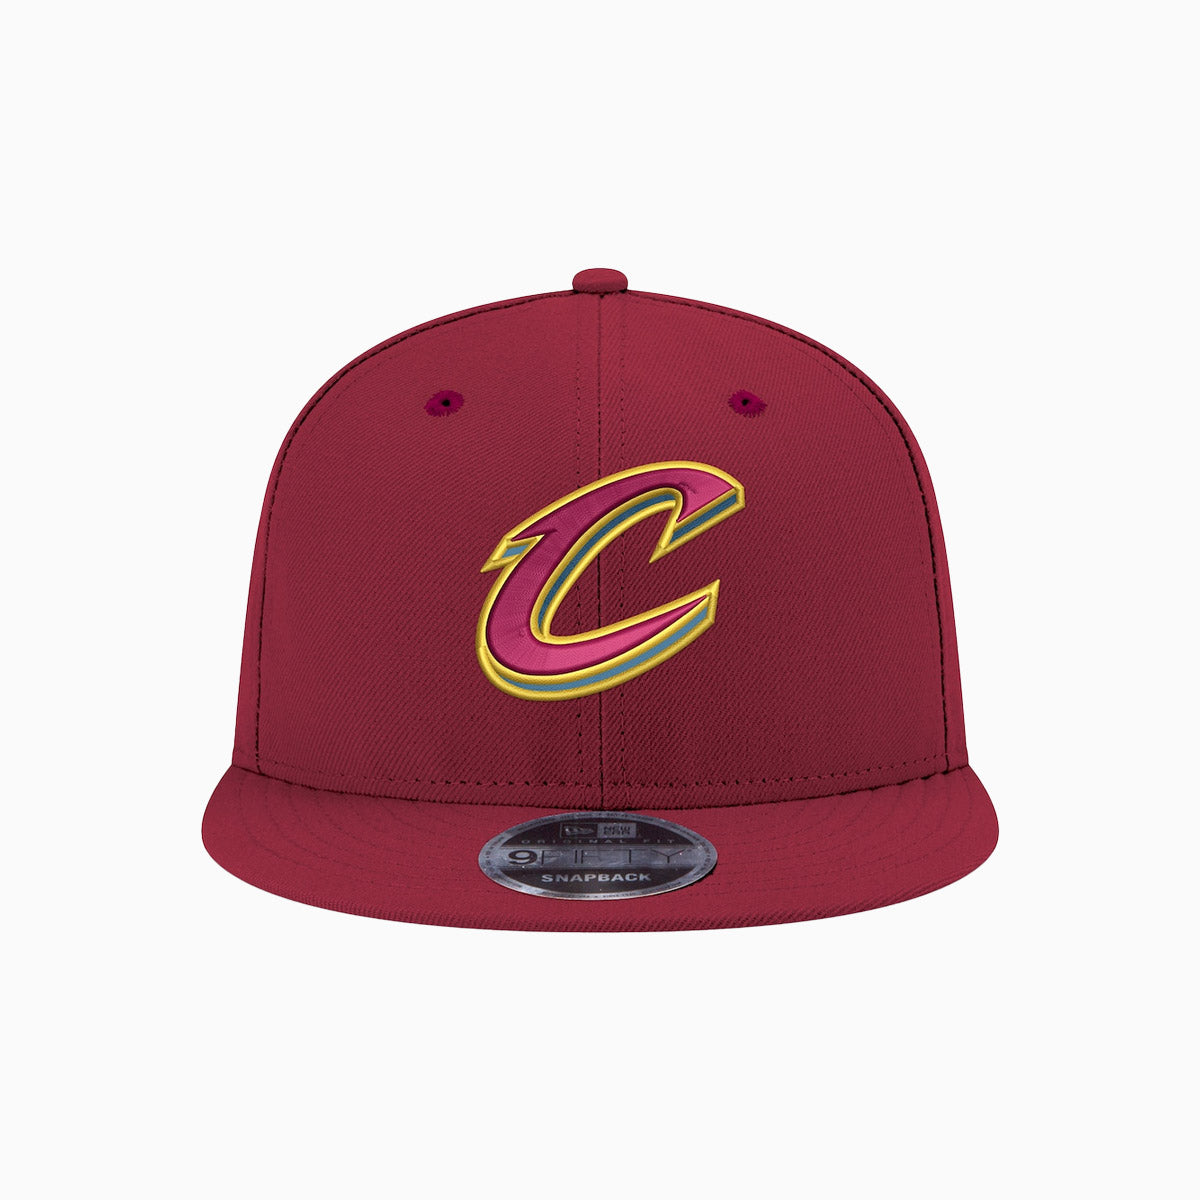 New Era Cleveland Cavaliers NBA Gold on Team 9FIFTY Snapback Hat